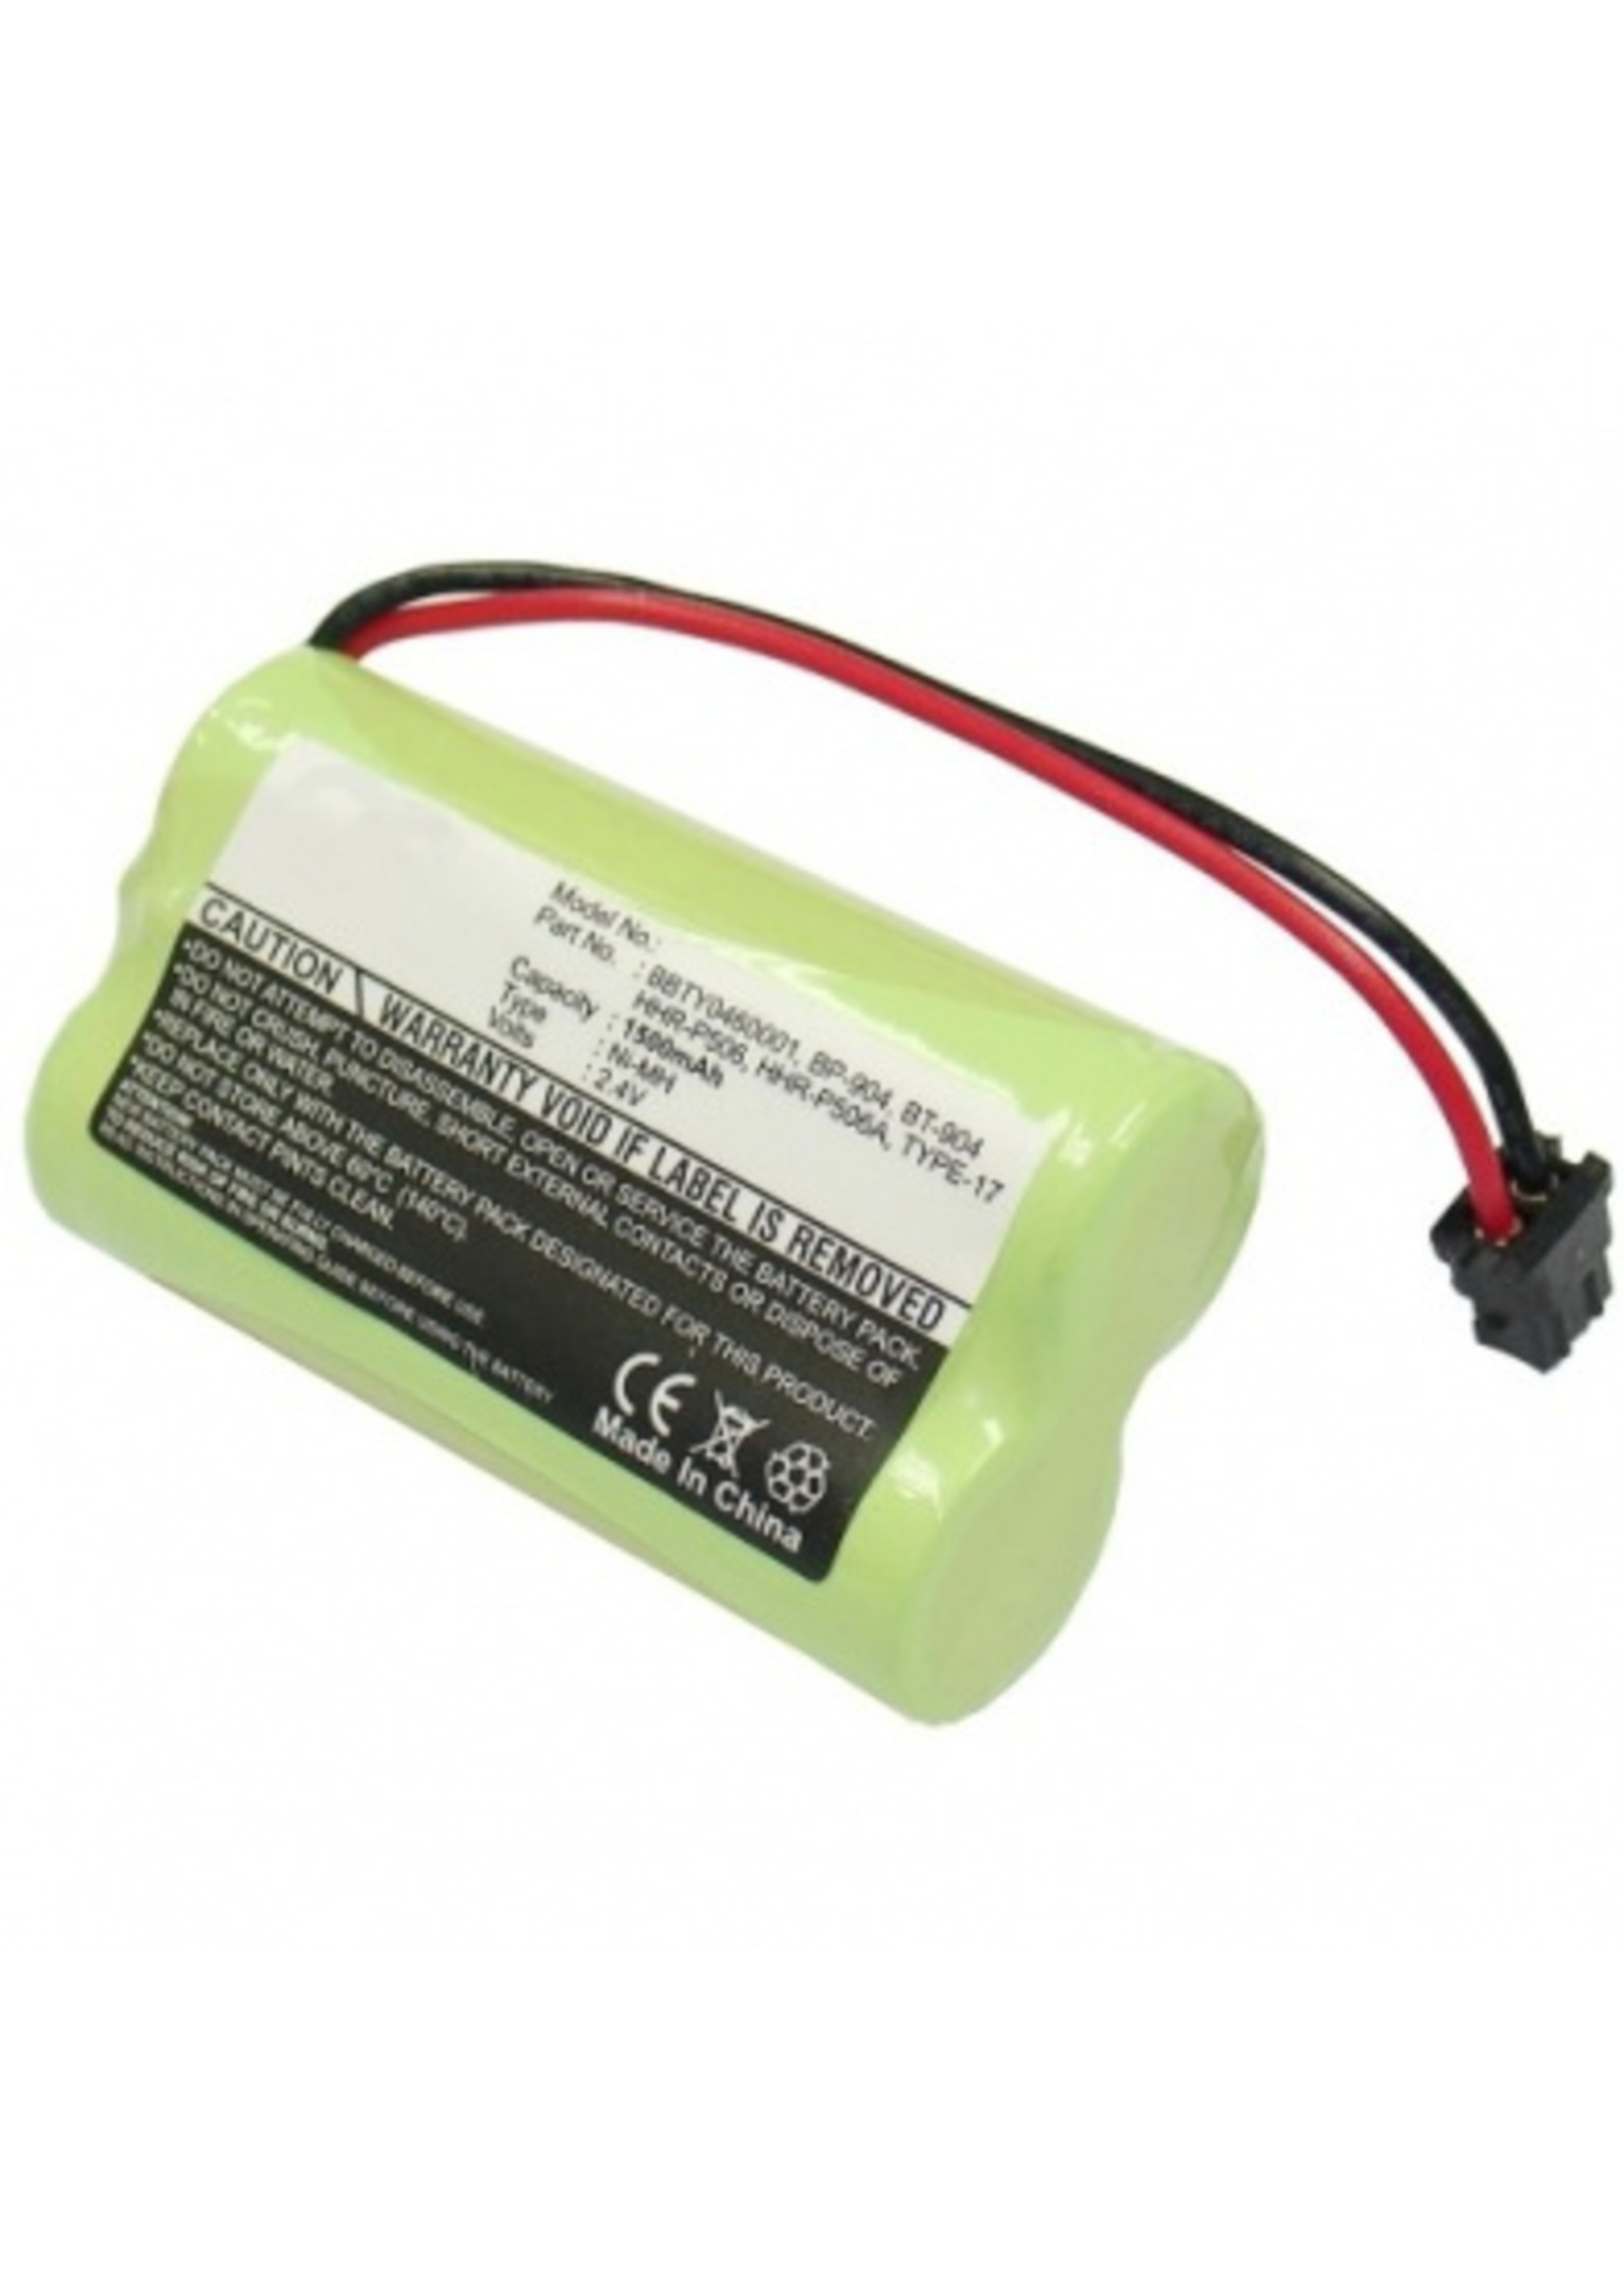 TCED TCB-T304 Cordless phone replacement battery Ni-Mh 2.4V 1500mAh